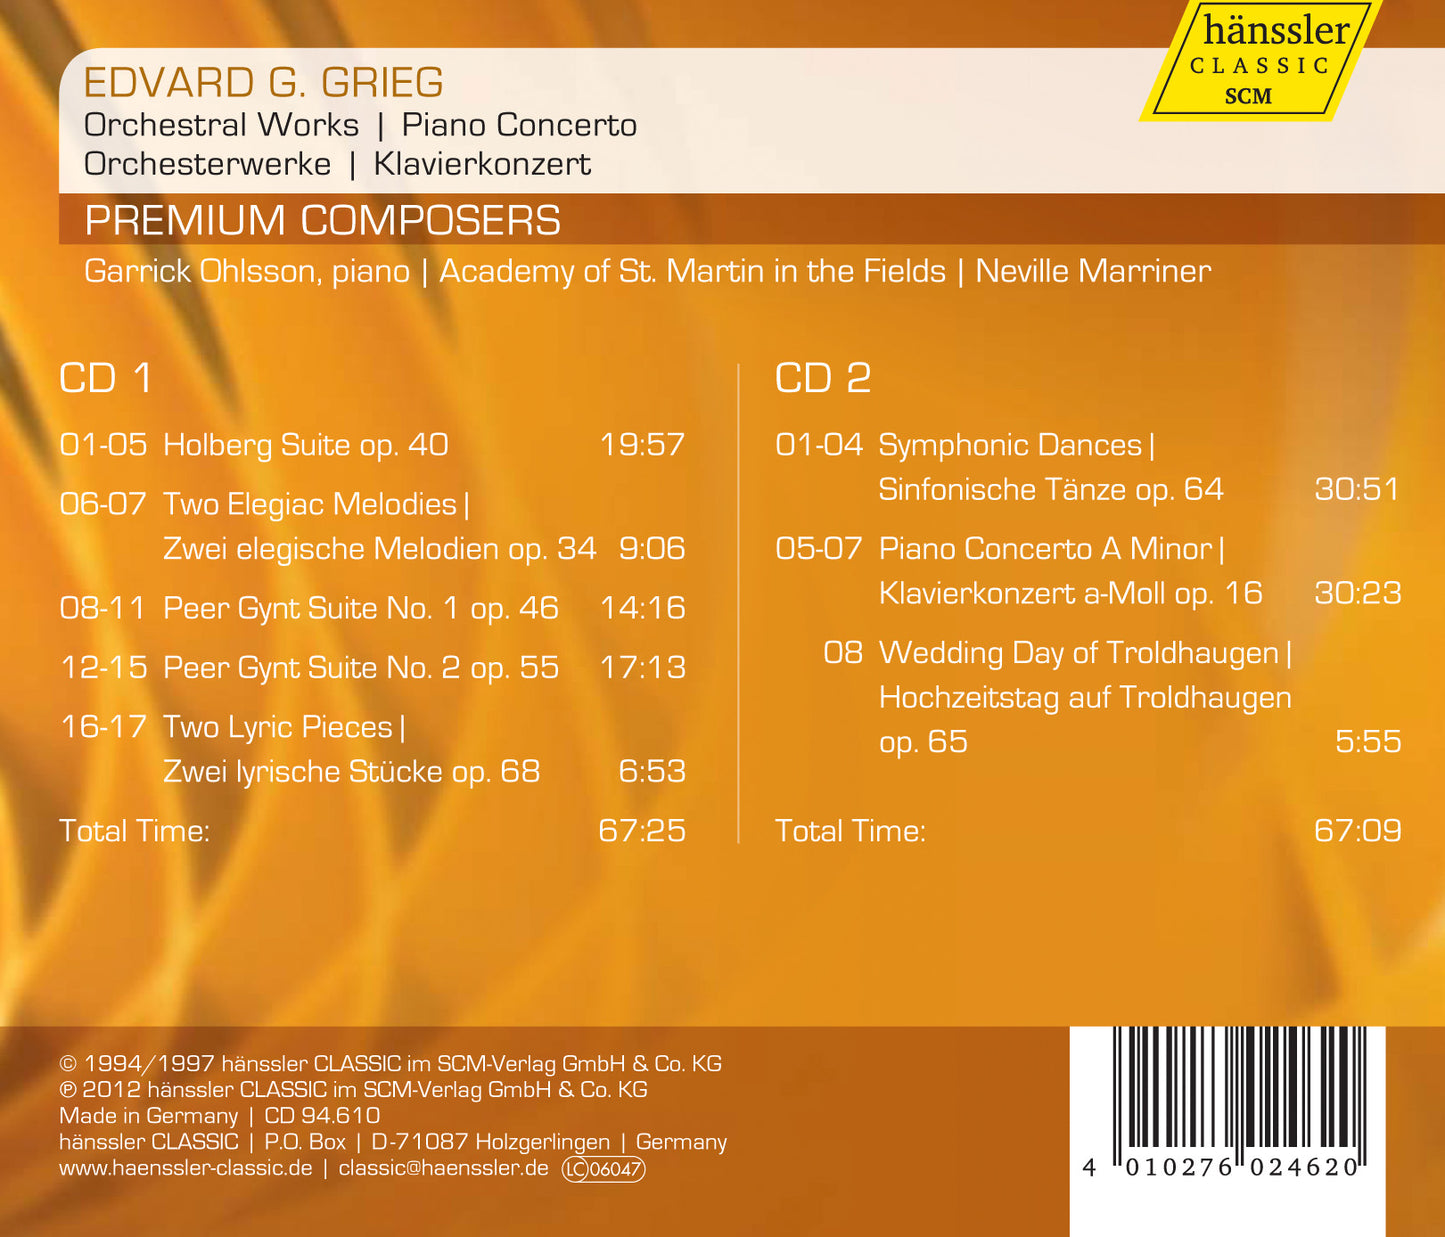 Grieg: Orchestral Works & Piano Concerto in A Minor / Ohlsson, Marriner, Academy of St. Martin in the Fields